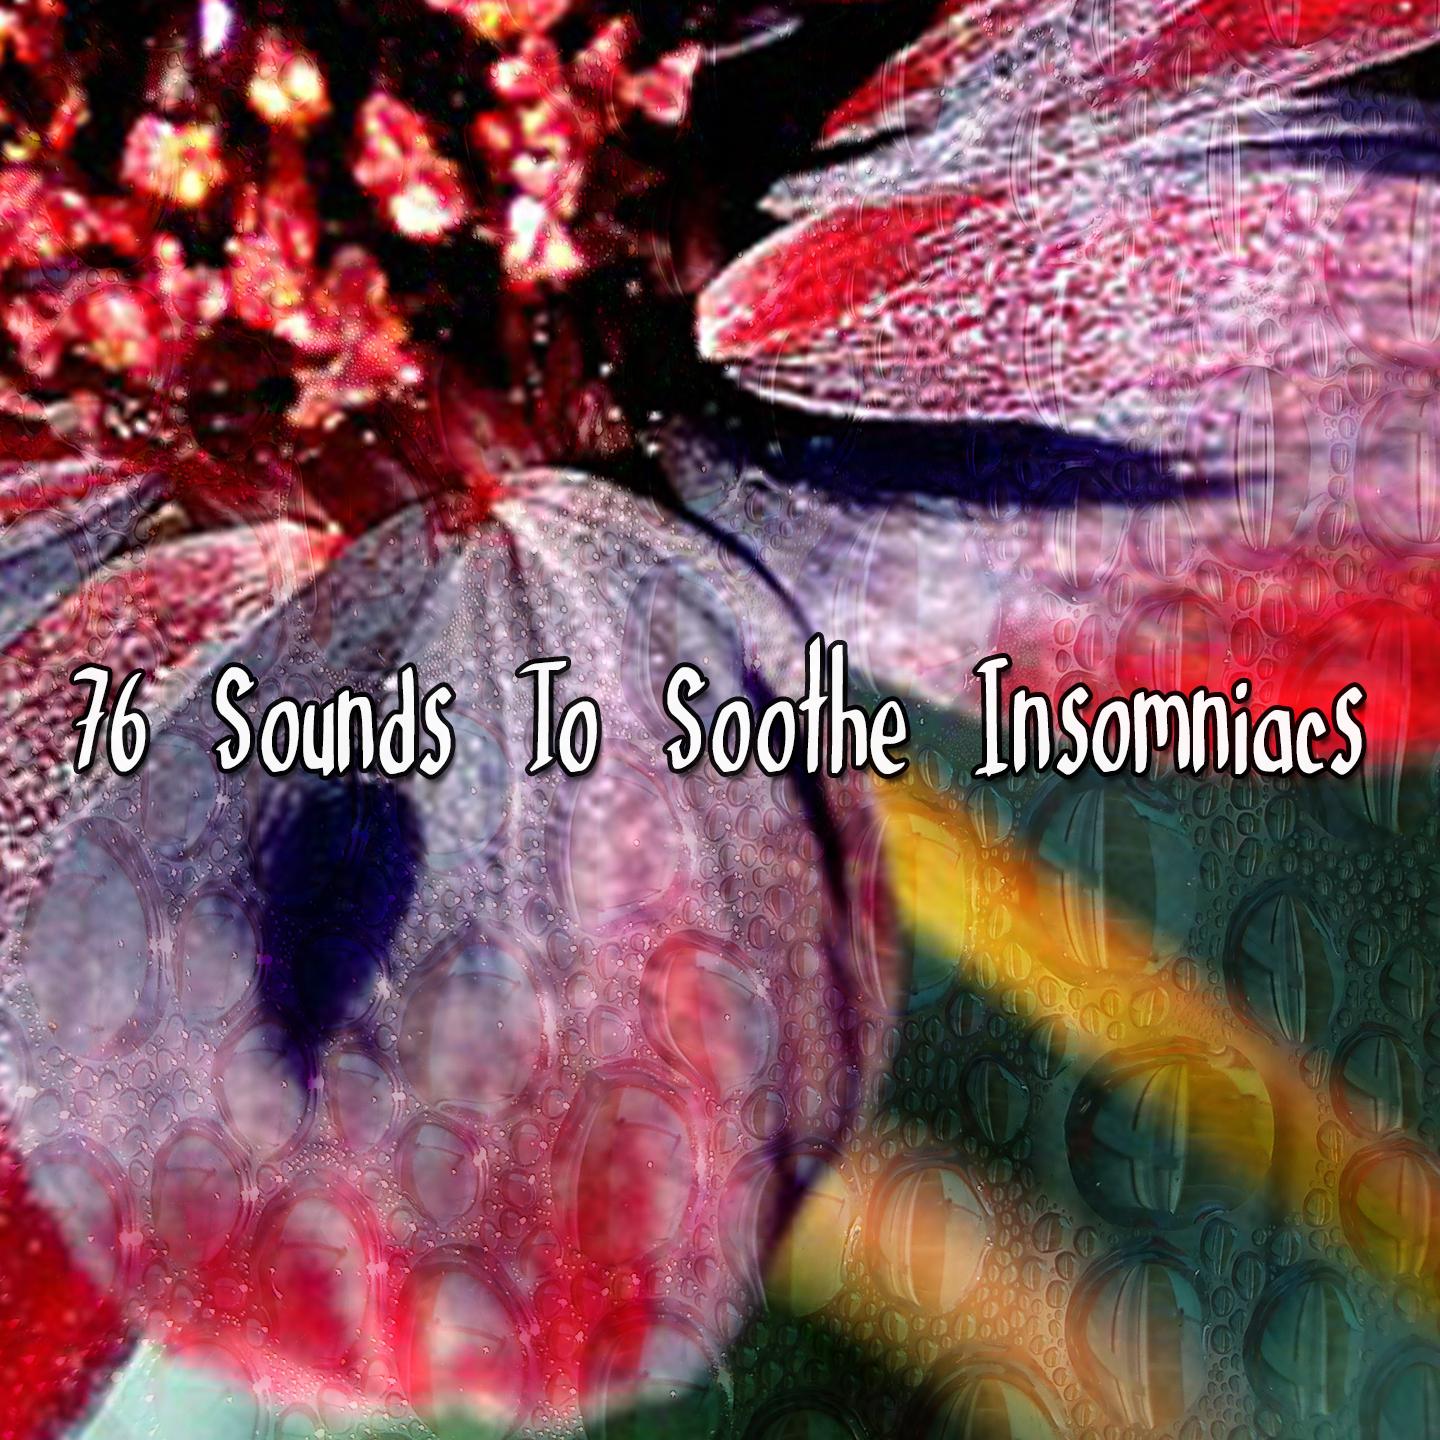 76 Sounds To Soothe Insomniacs